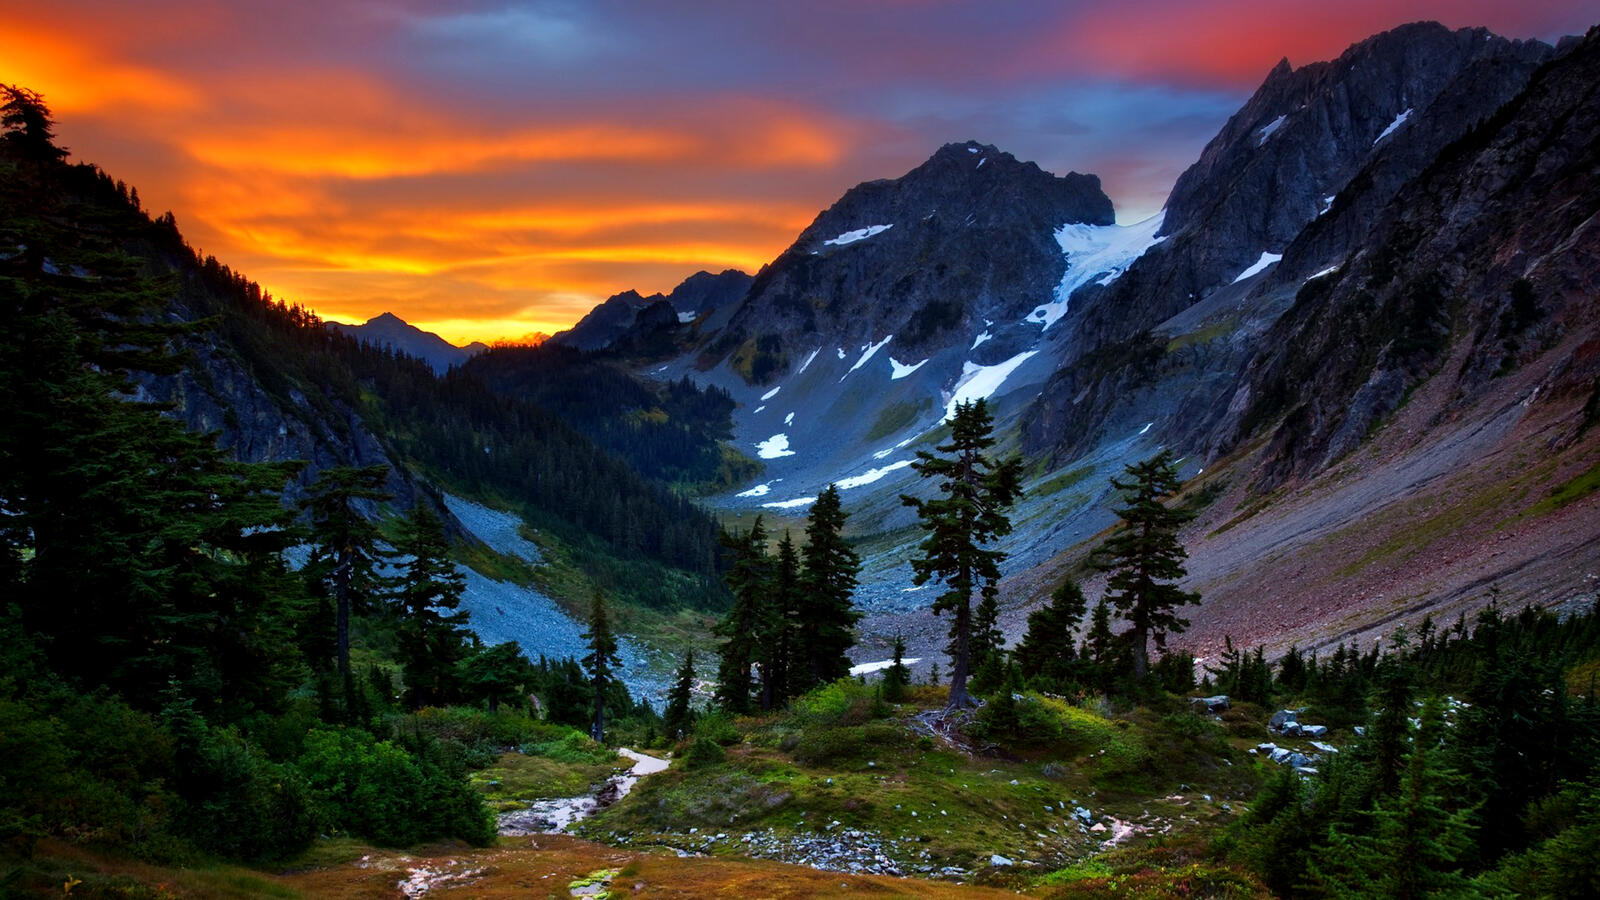 Wallpapers nature mountains view on the desktop